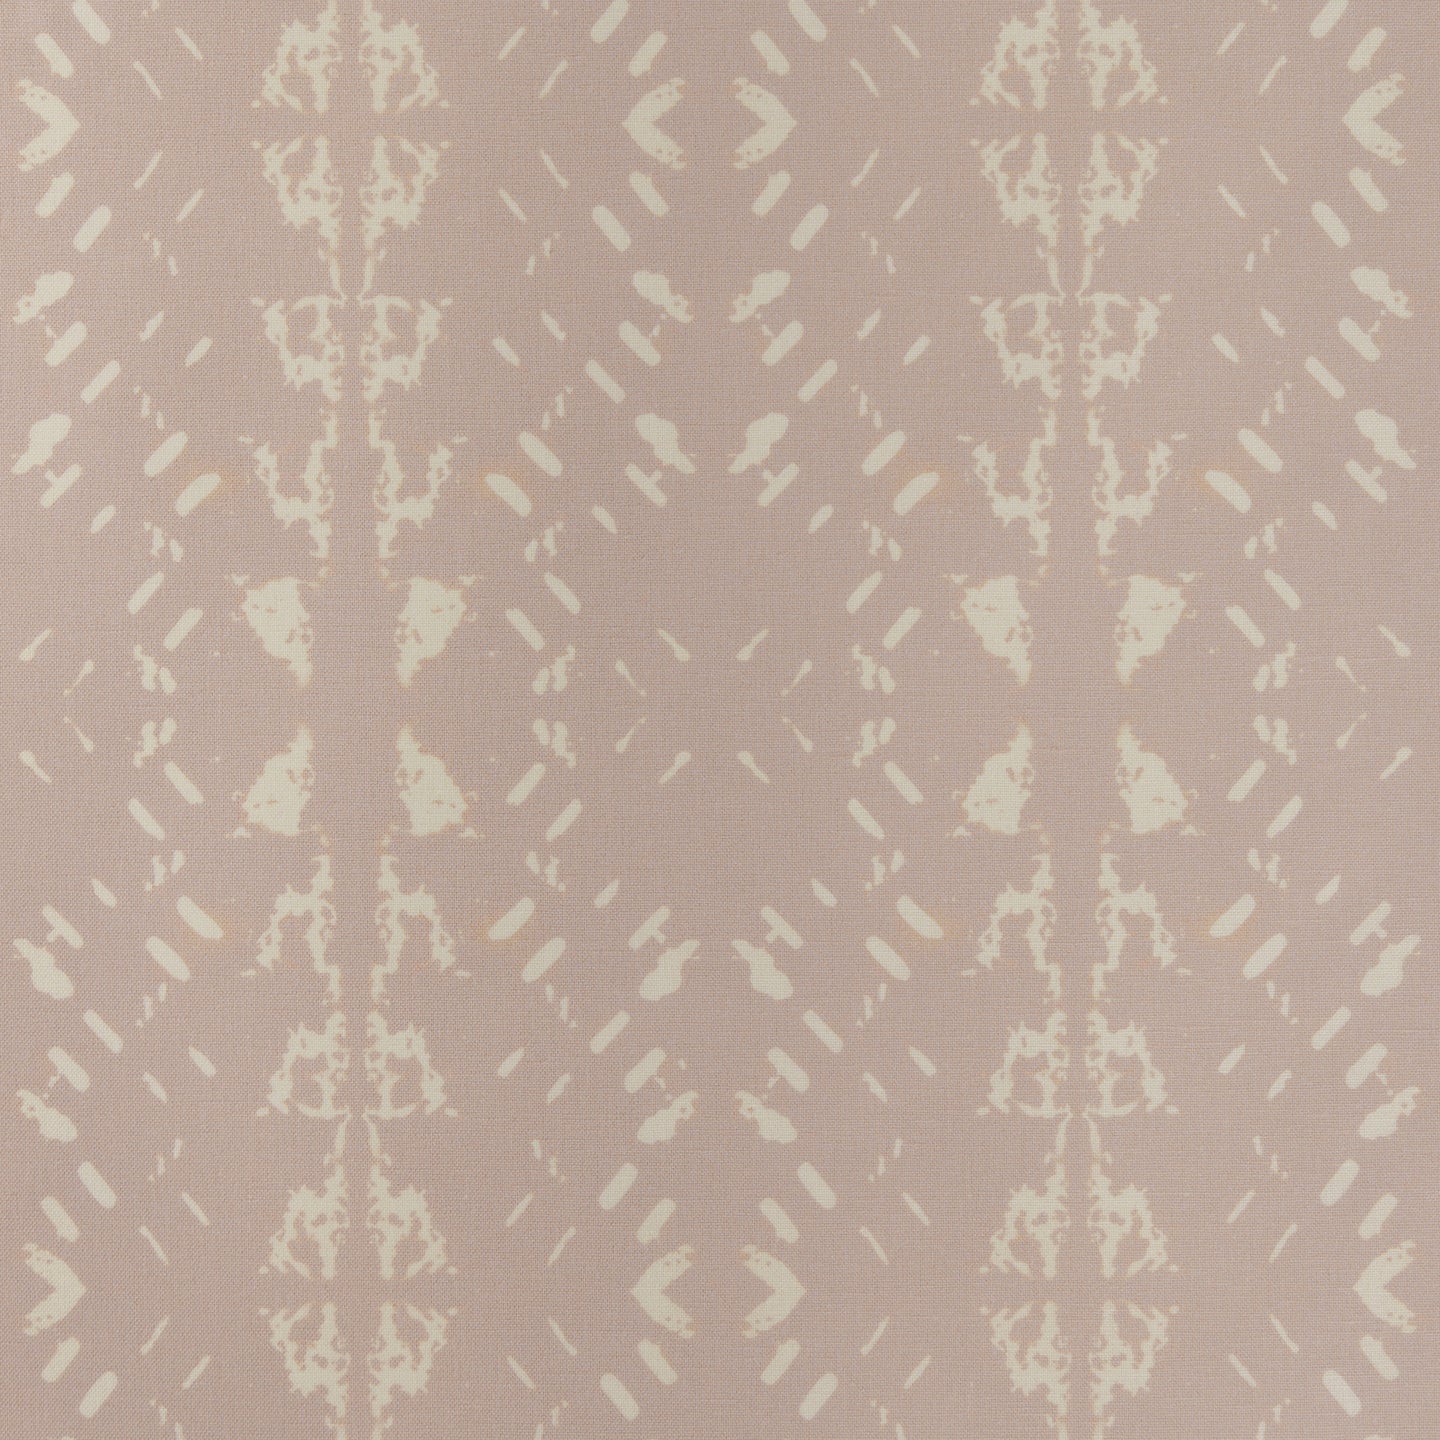 Native Embers (Bleached Rose) Fabric